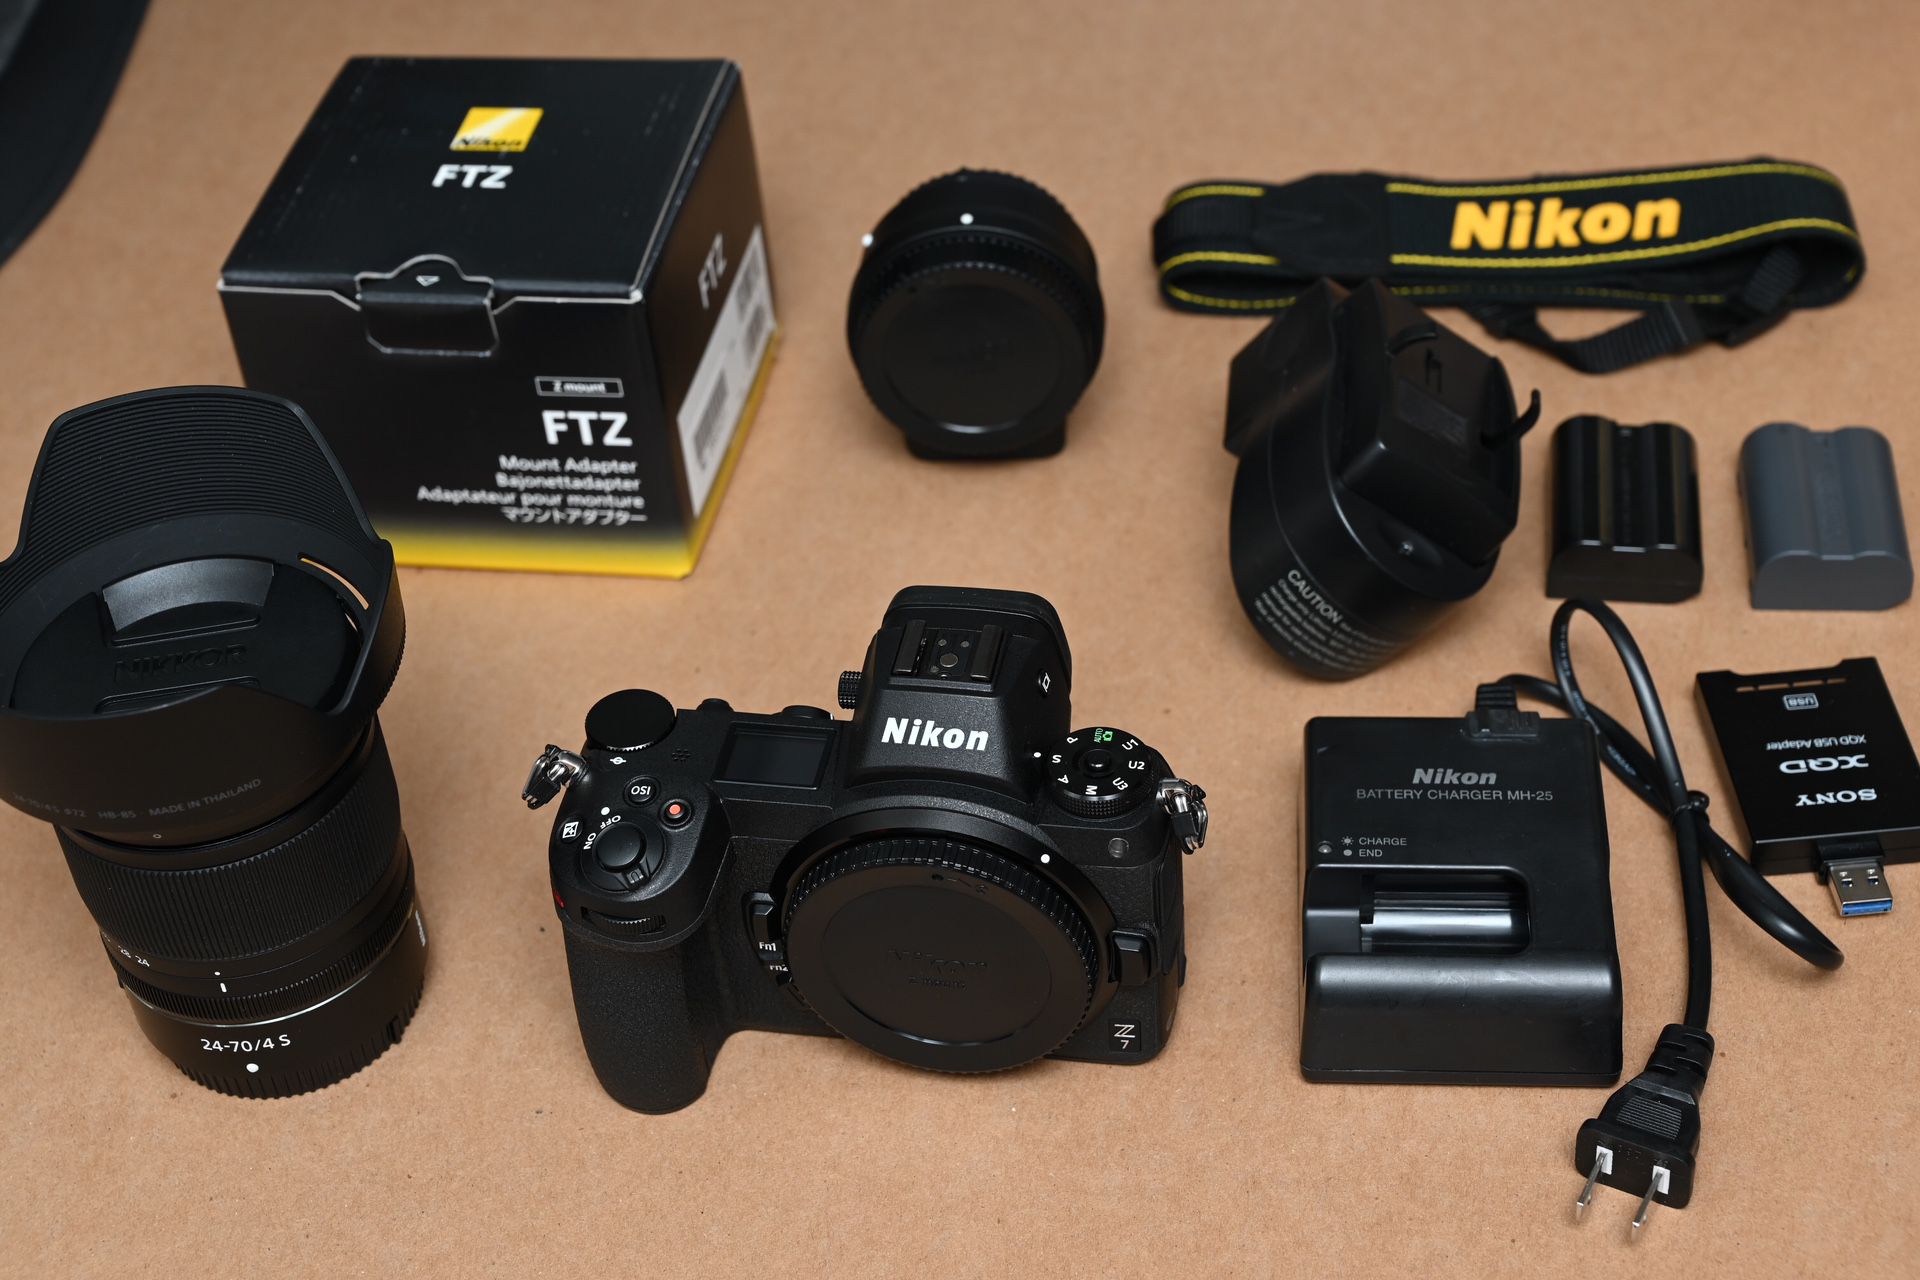 Nikon Z7 with 24-70mm lens and adapter